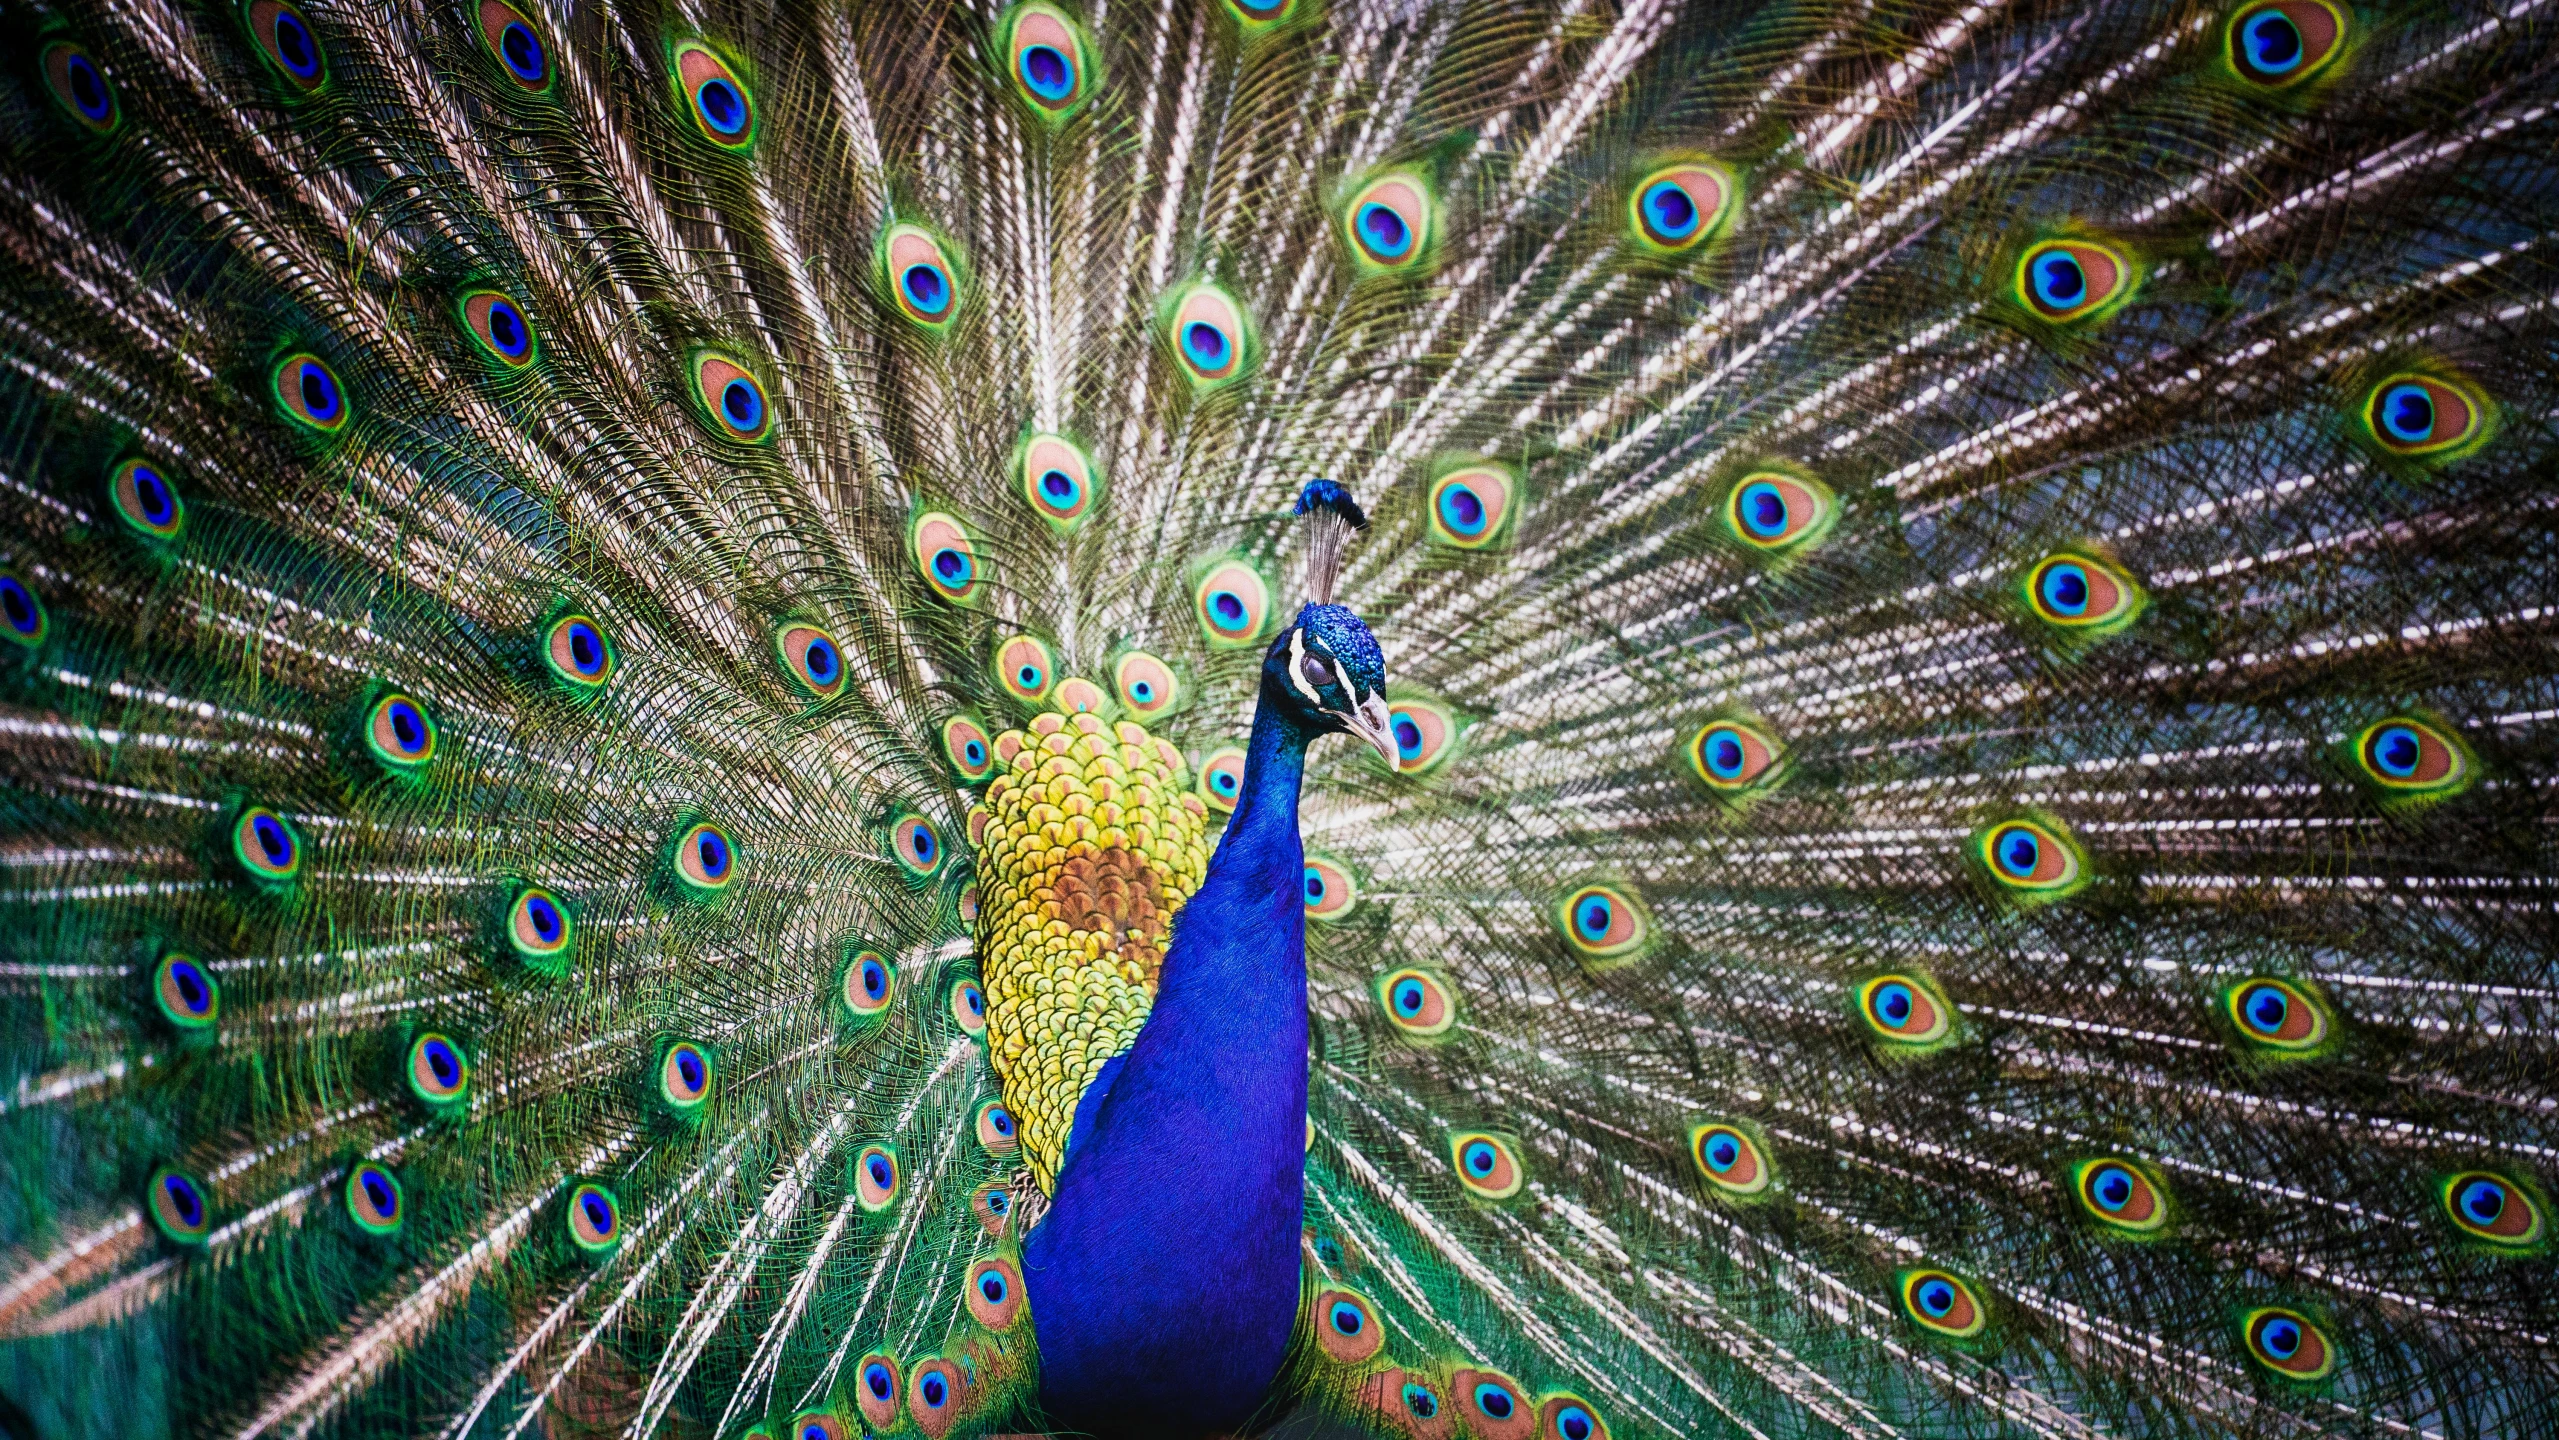 the peacock is displaying his tail feathers with his feathers